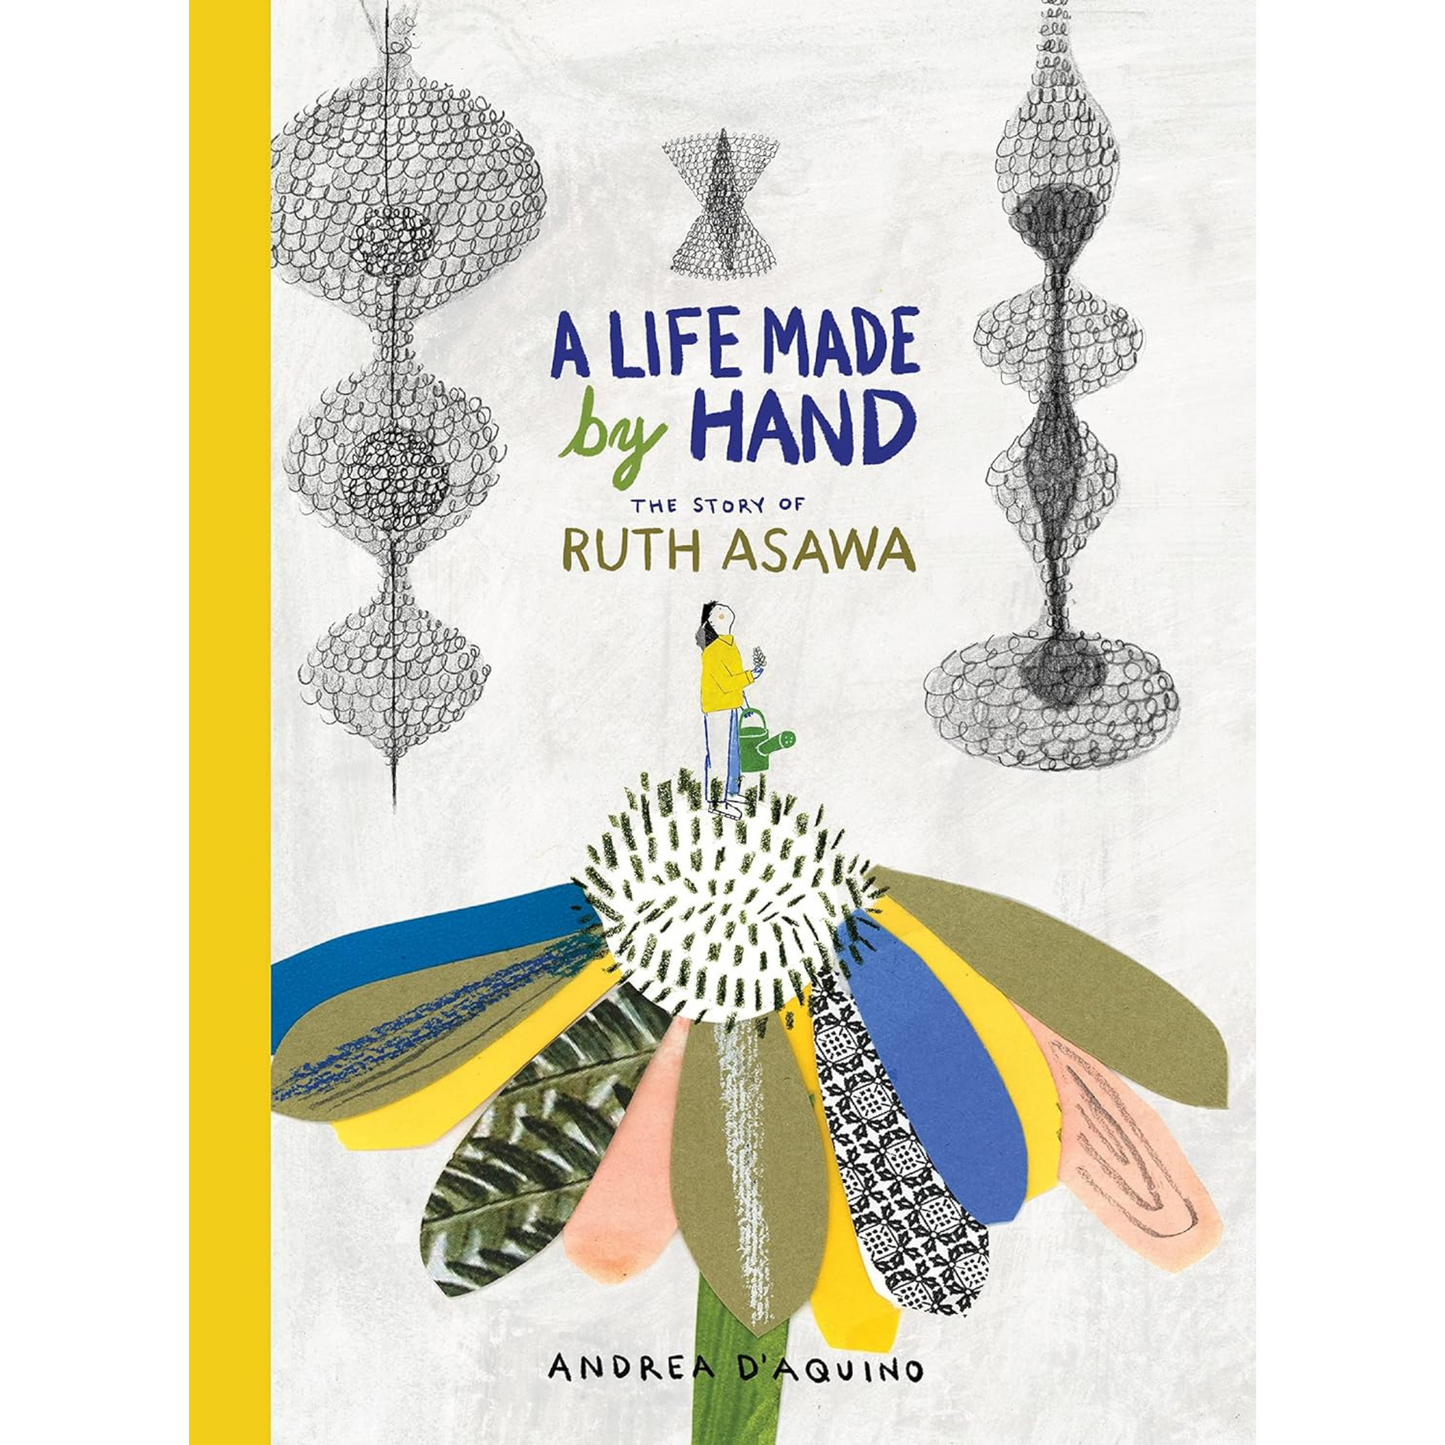 Illustrated cover with a tiny Ruth Asawa standing on a colourful flower, surrounded by some of her suspended sculptures.